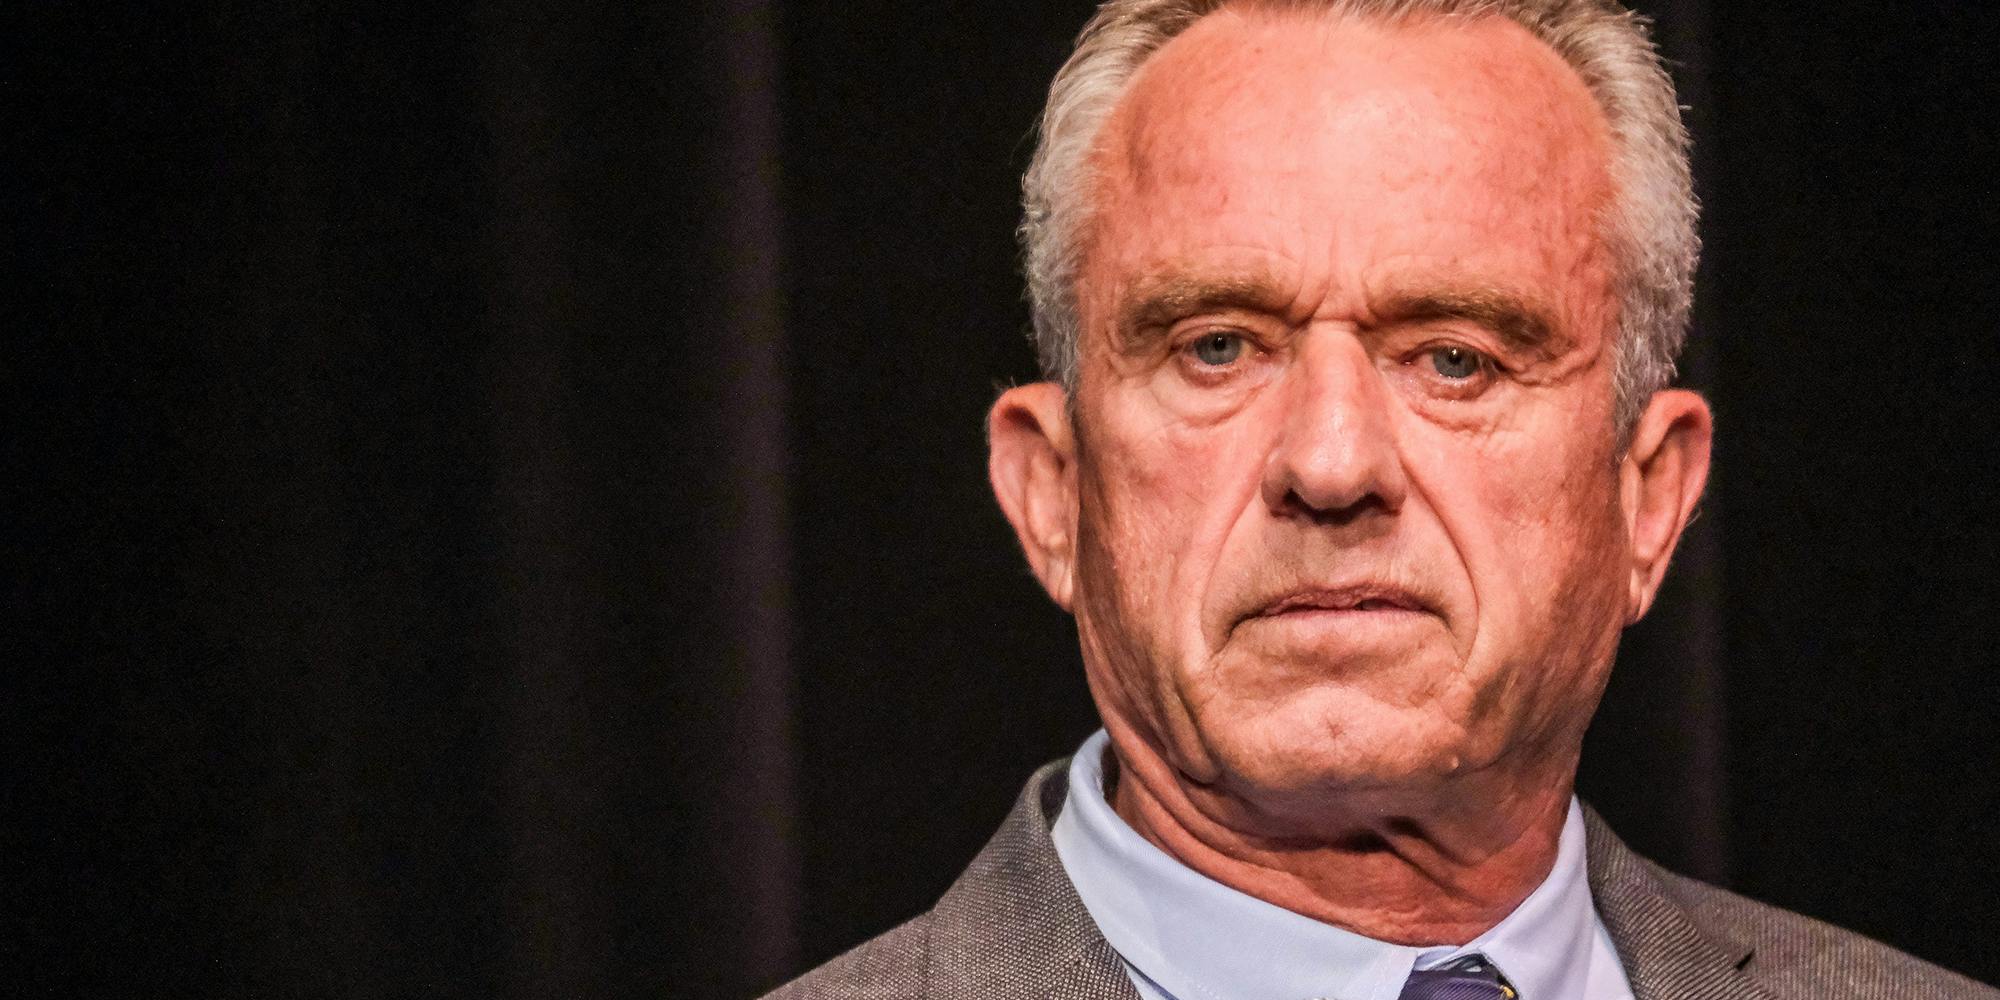 RFK Jr Independent Run Gets a Thumbs Down From Sibilings